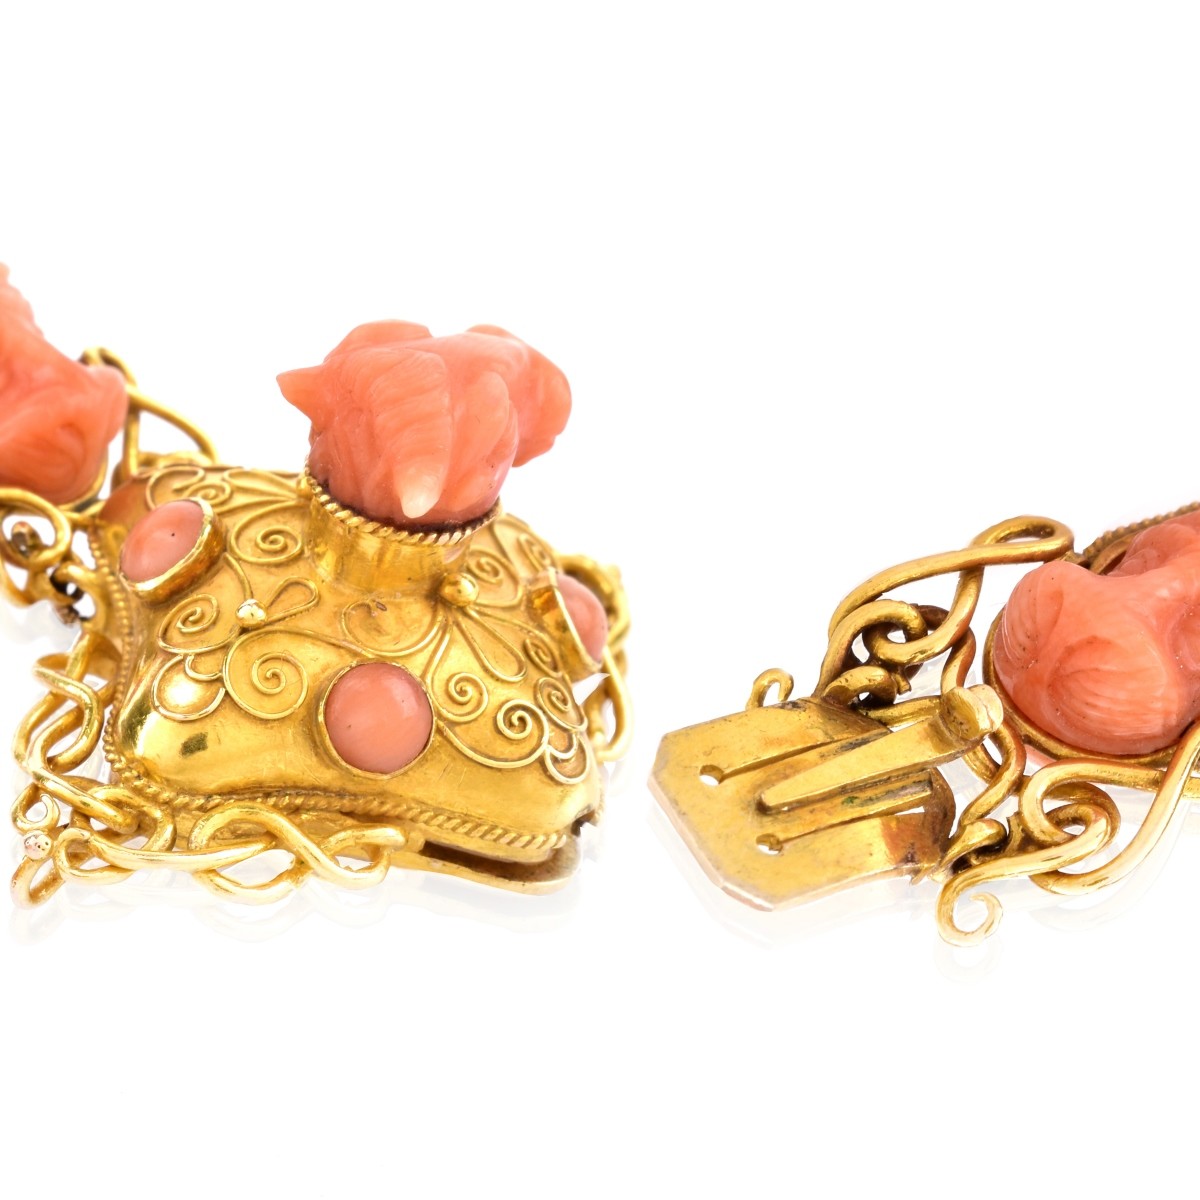 Circa 1900 Red Coral and 14K Gold Bracelet